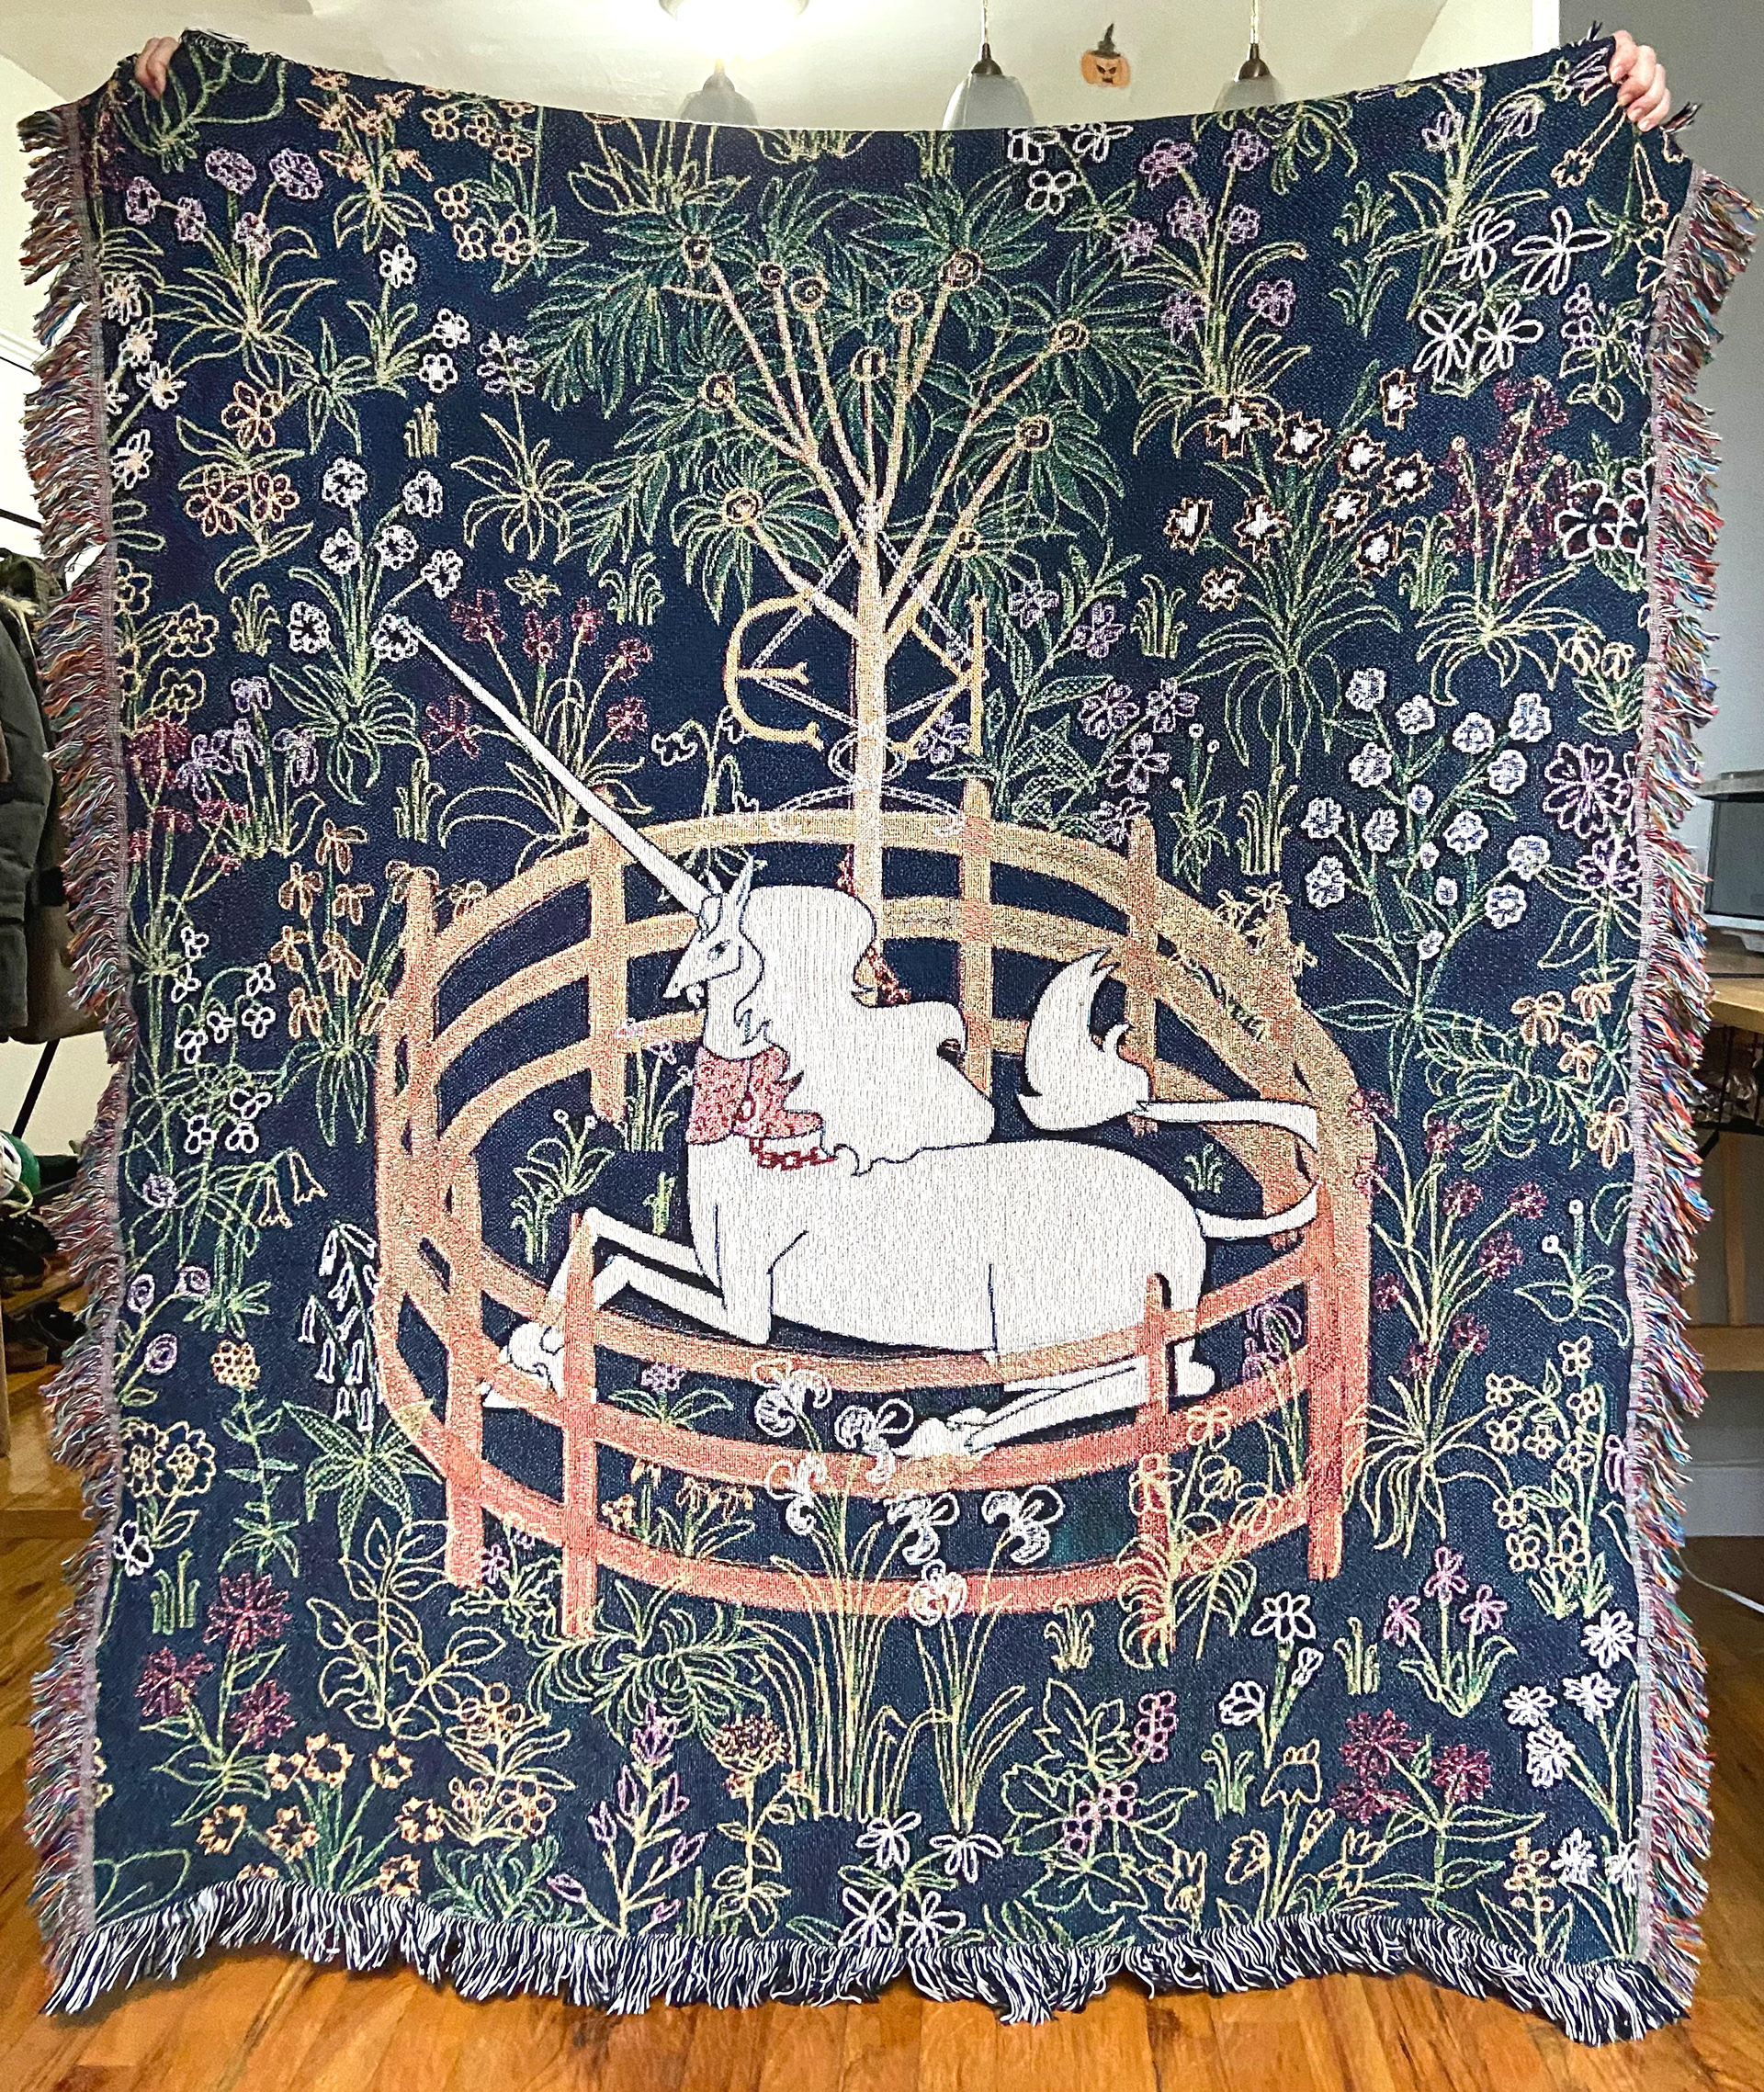 Woven wall tapestry by Edanur Kuntman depicting the Unicorn In Captivity Tapestry in her own style